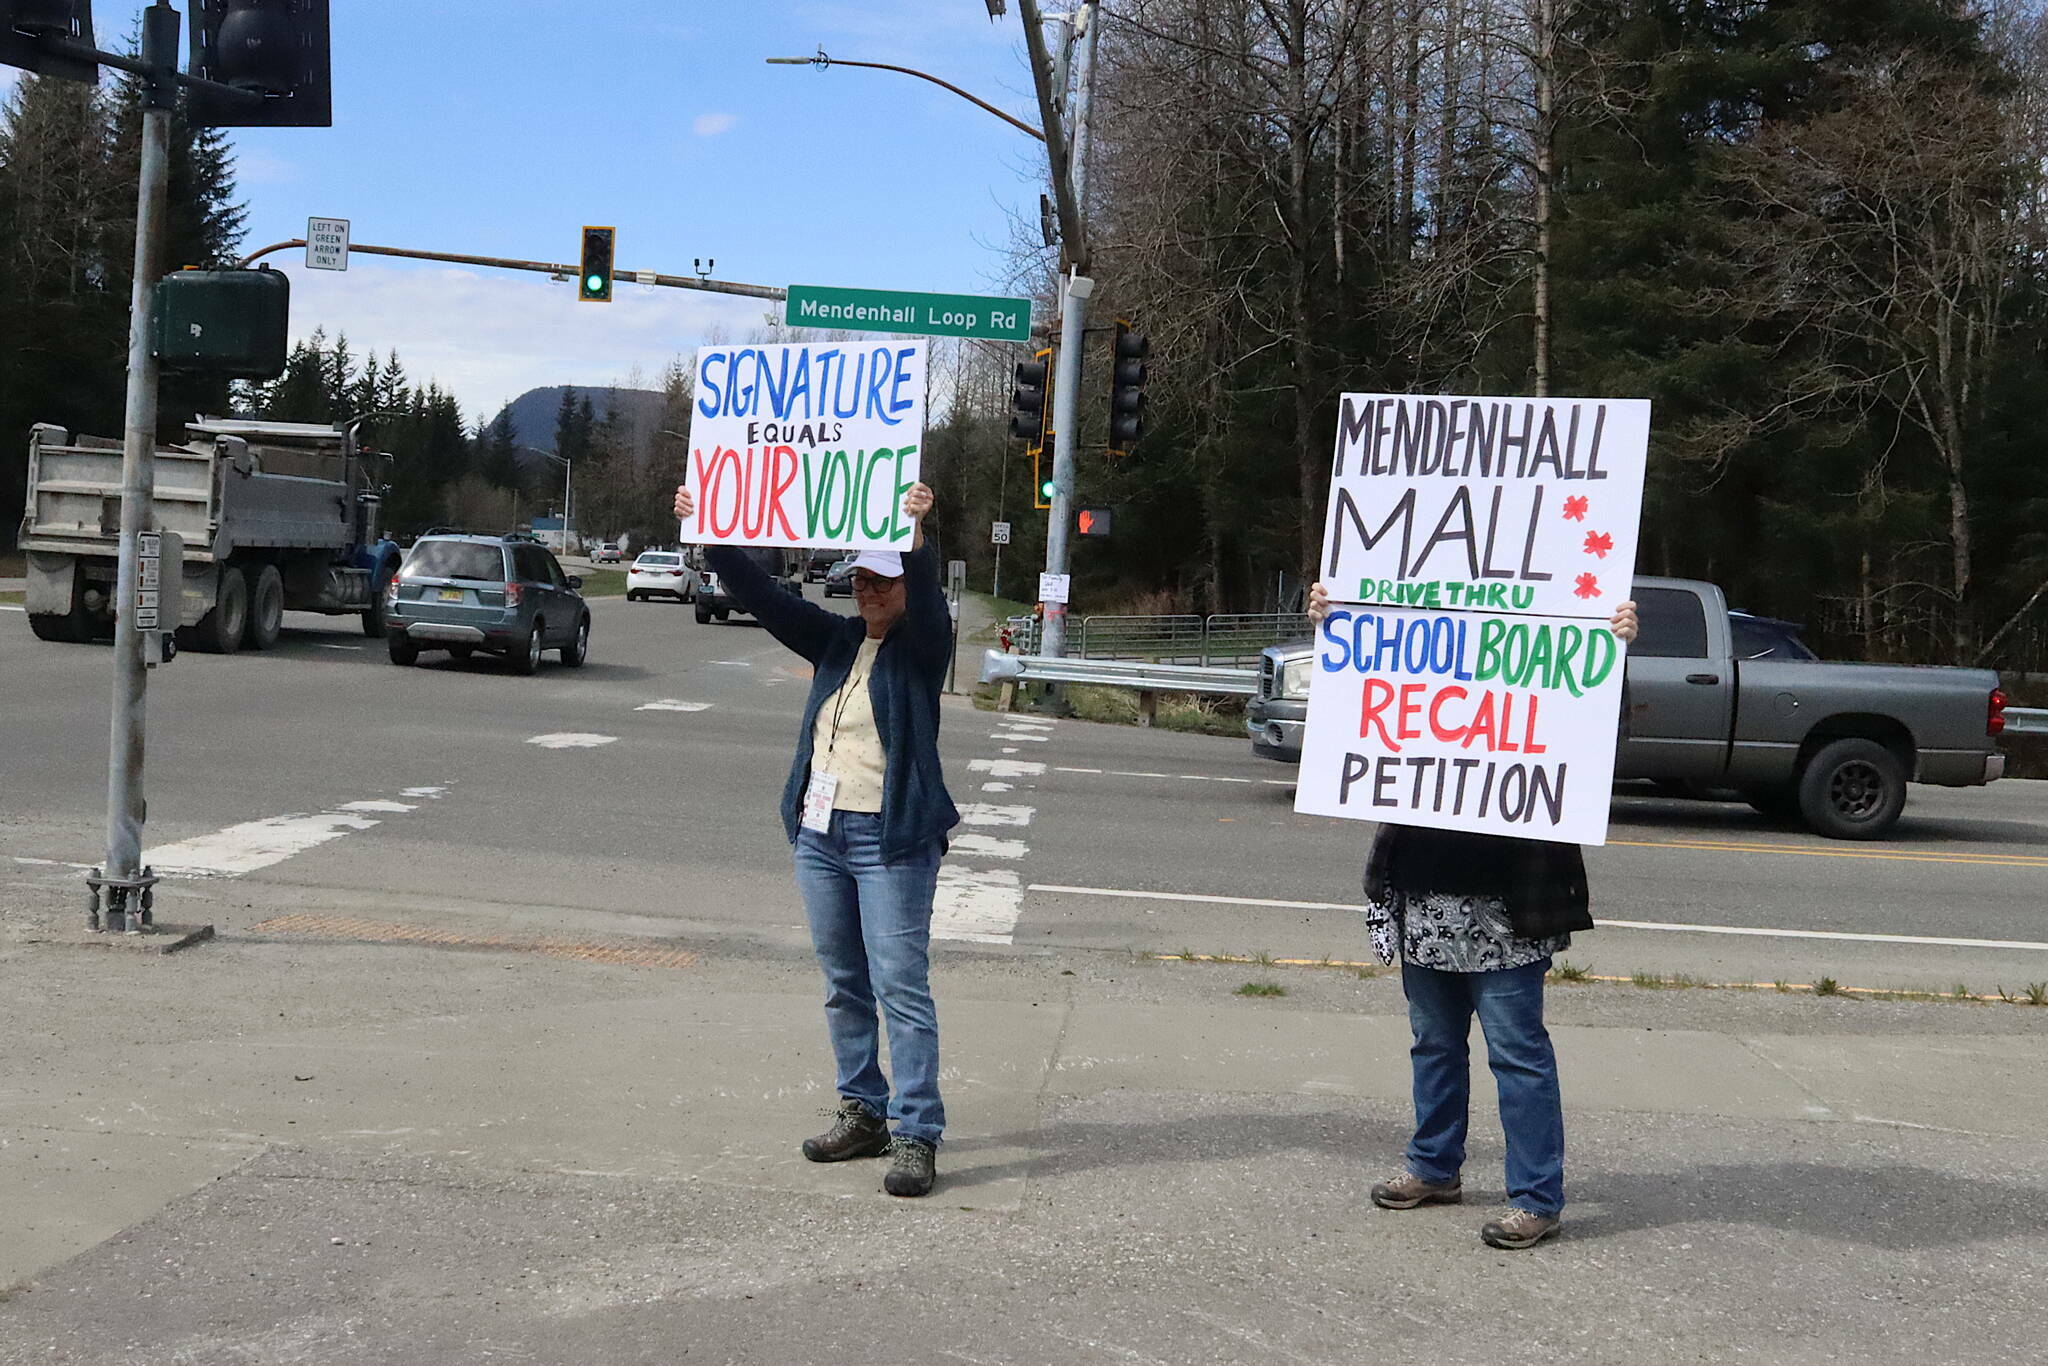 Shannan Greene (left) and Sharyn Augustine hold signs on April 27 urging residents to sign recall petitions for Juneau Board of Education President Deedie Sorensen and Vice President Emil Mackey due to their roles in a budget crisis for the current fiscal year. (Mark Sabbatini / Juneau Empire file photo)